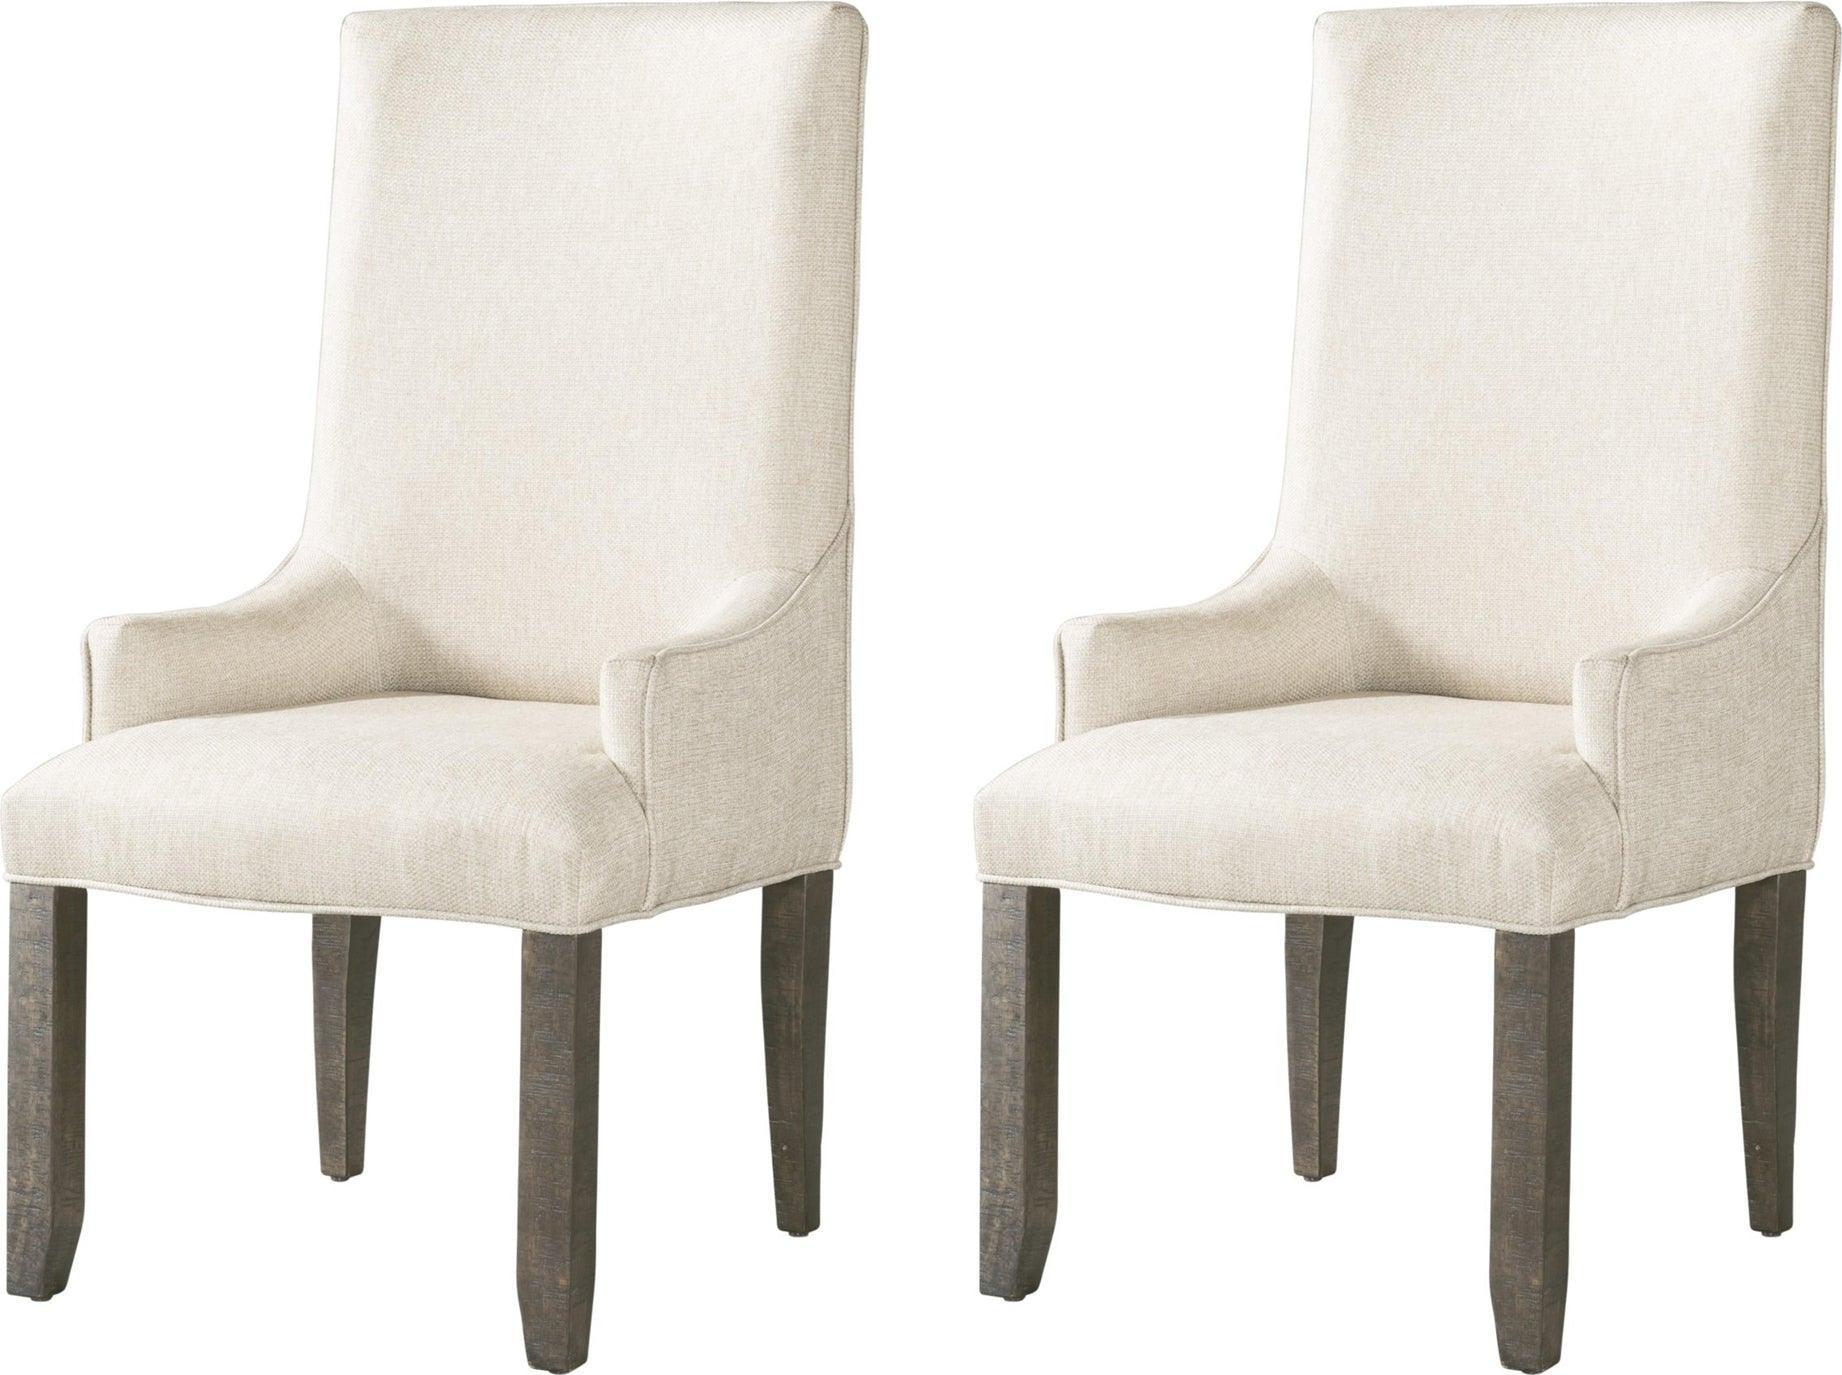 Elements Dining Chairs - Flynn Parson Chair Set (Set of 2)